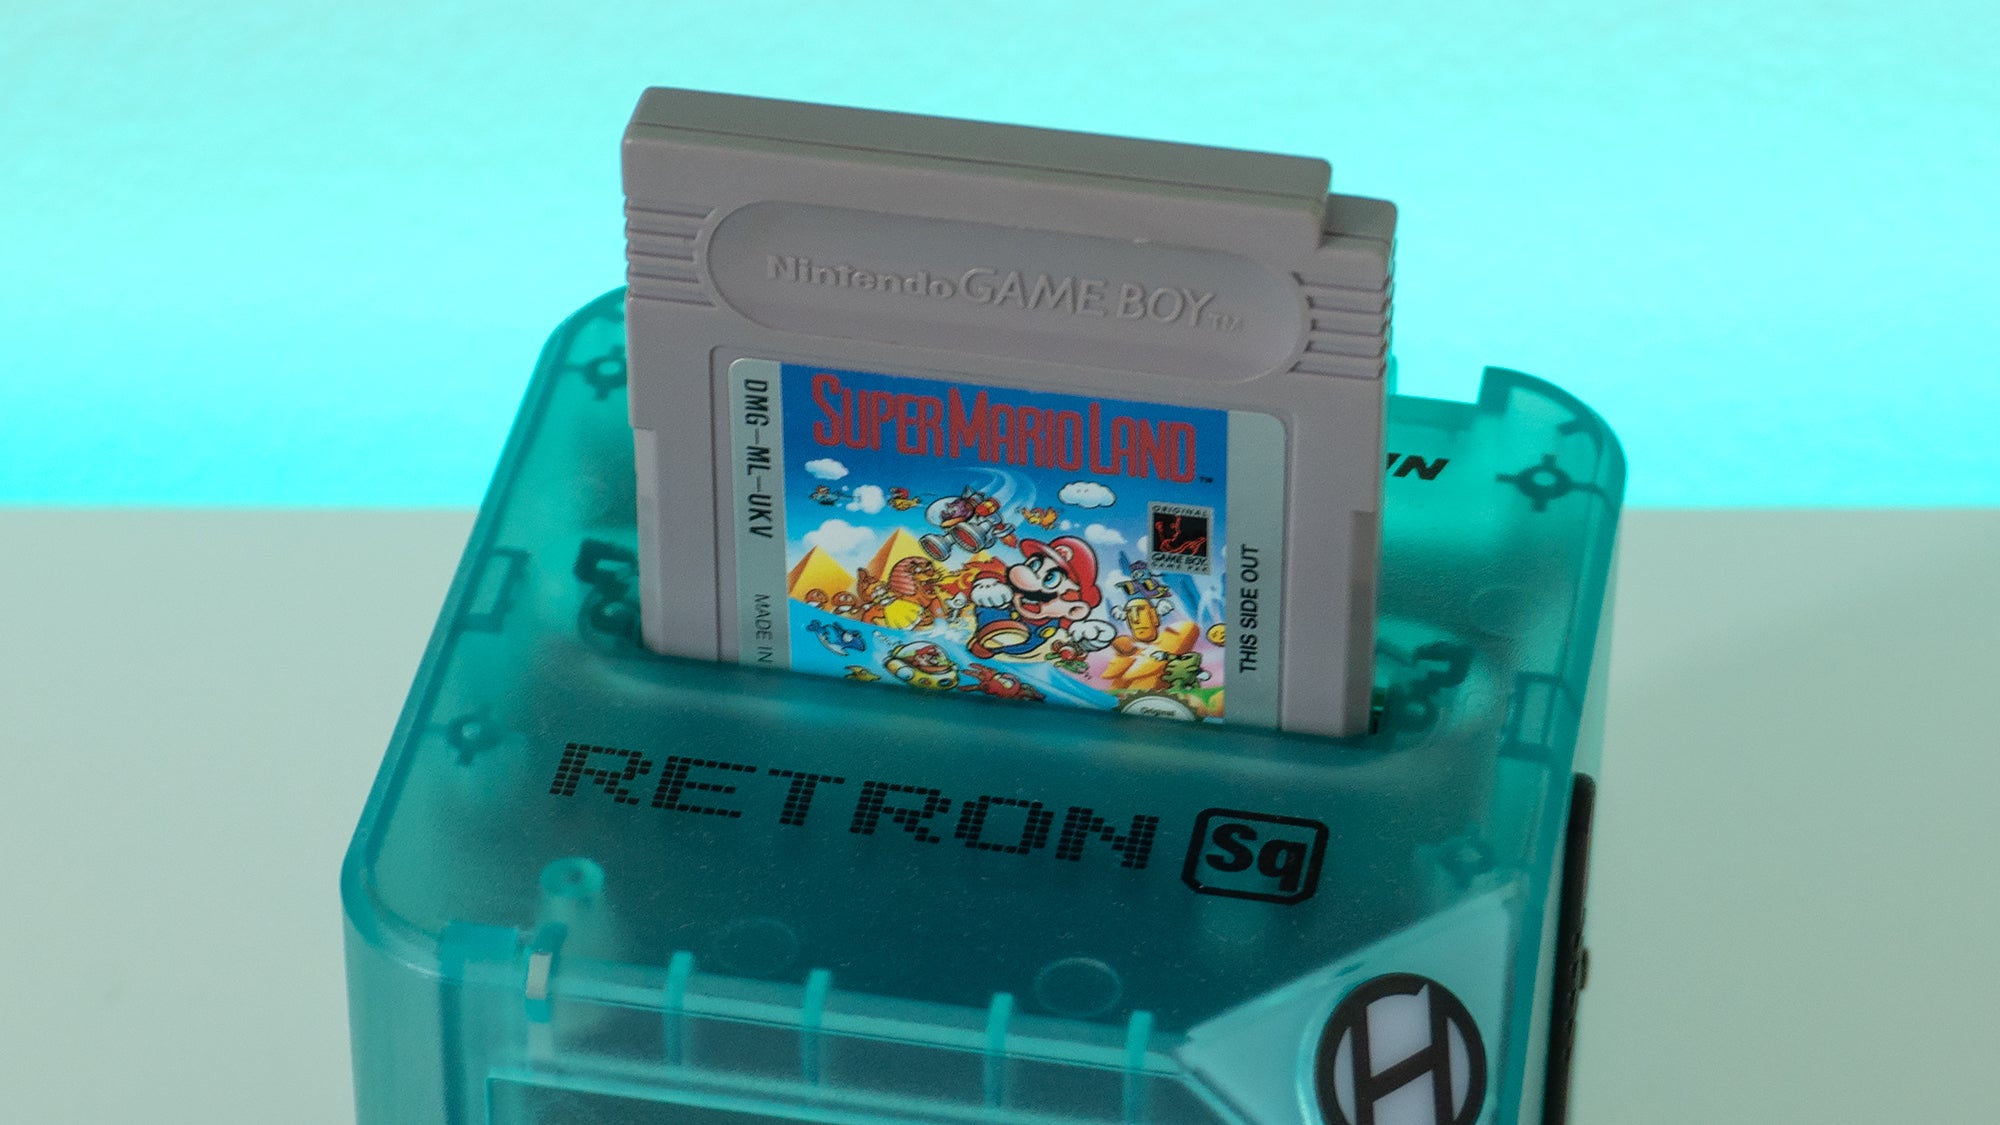 The Retron Sq requires original game cartridges to work, and because of how its emulation functions, multi-game flash carts are not compatible. (Photo: Andrew Liszewski/Gizmodo)